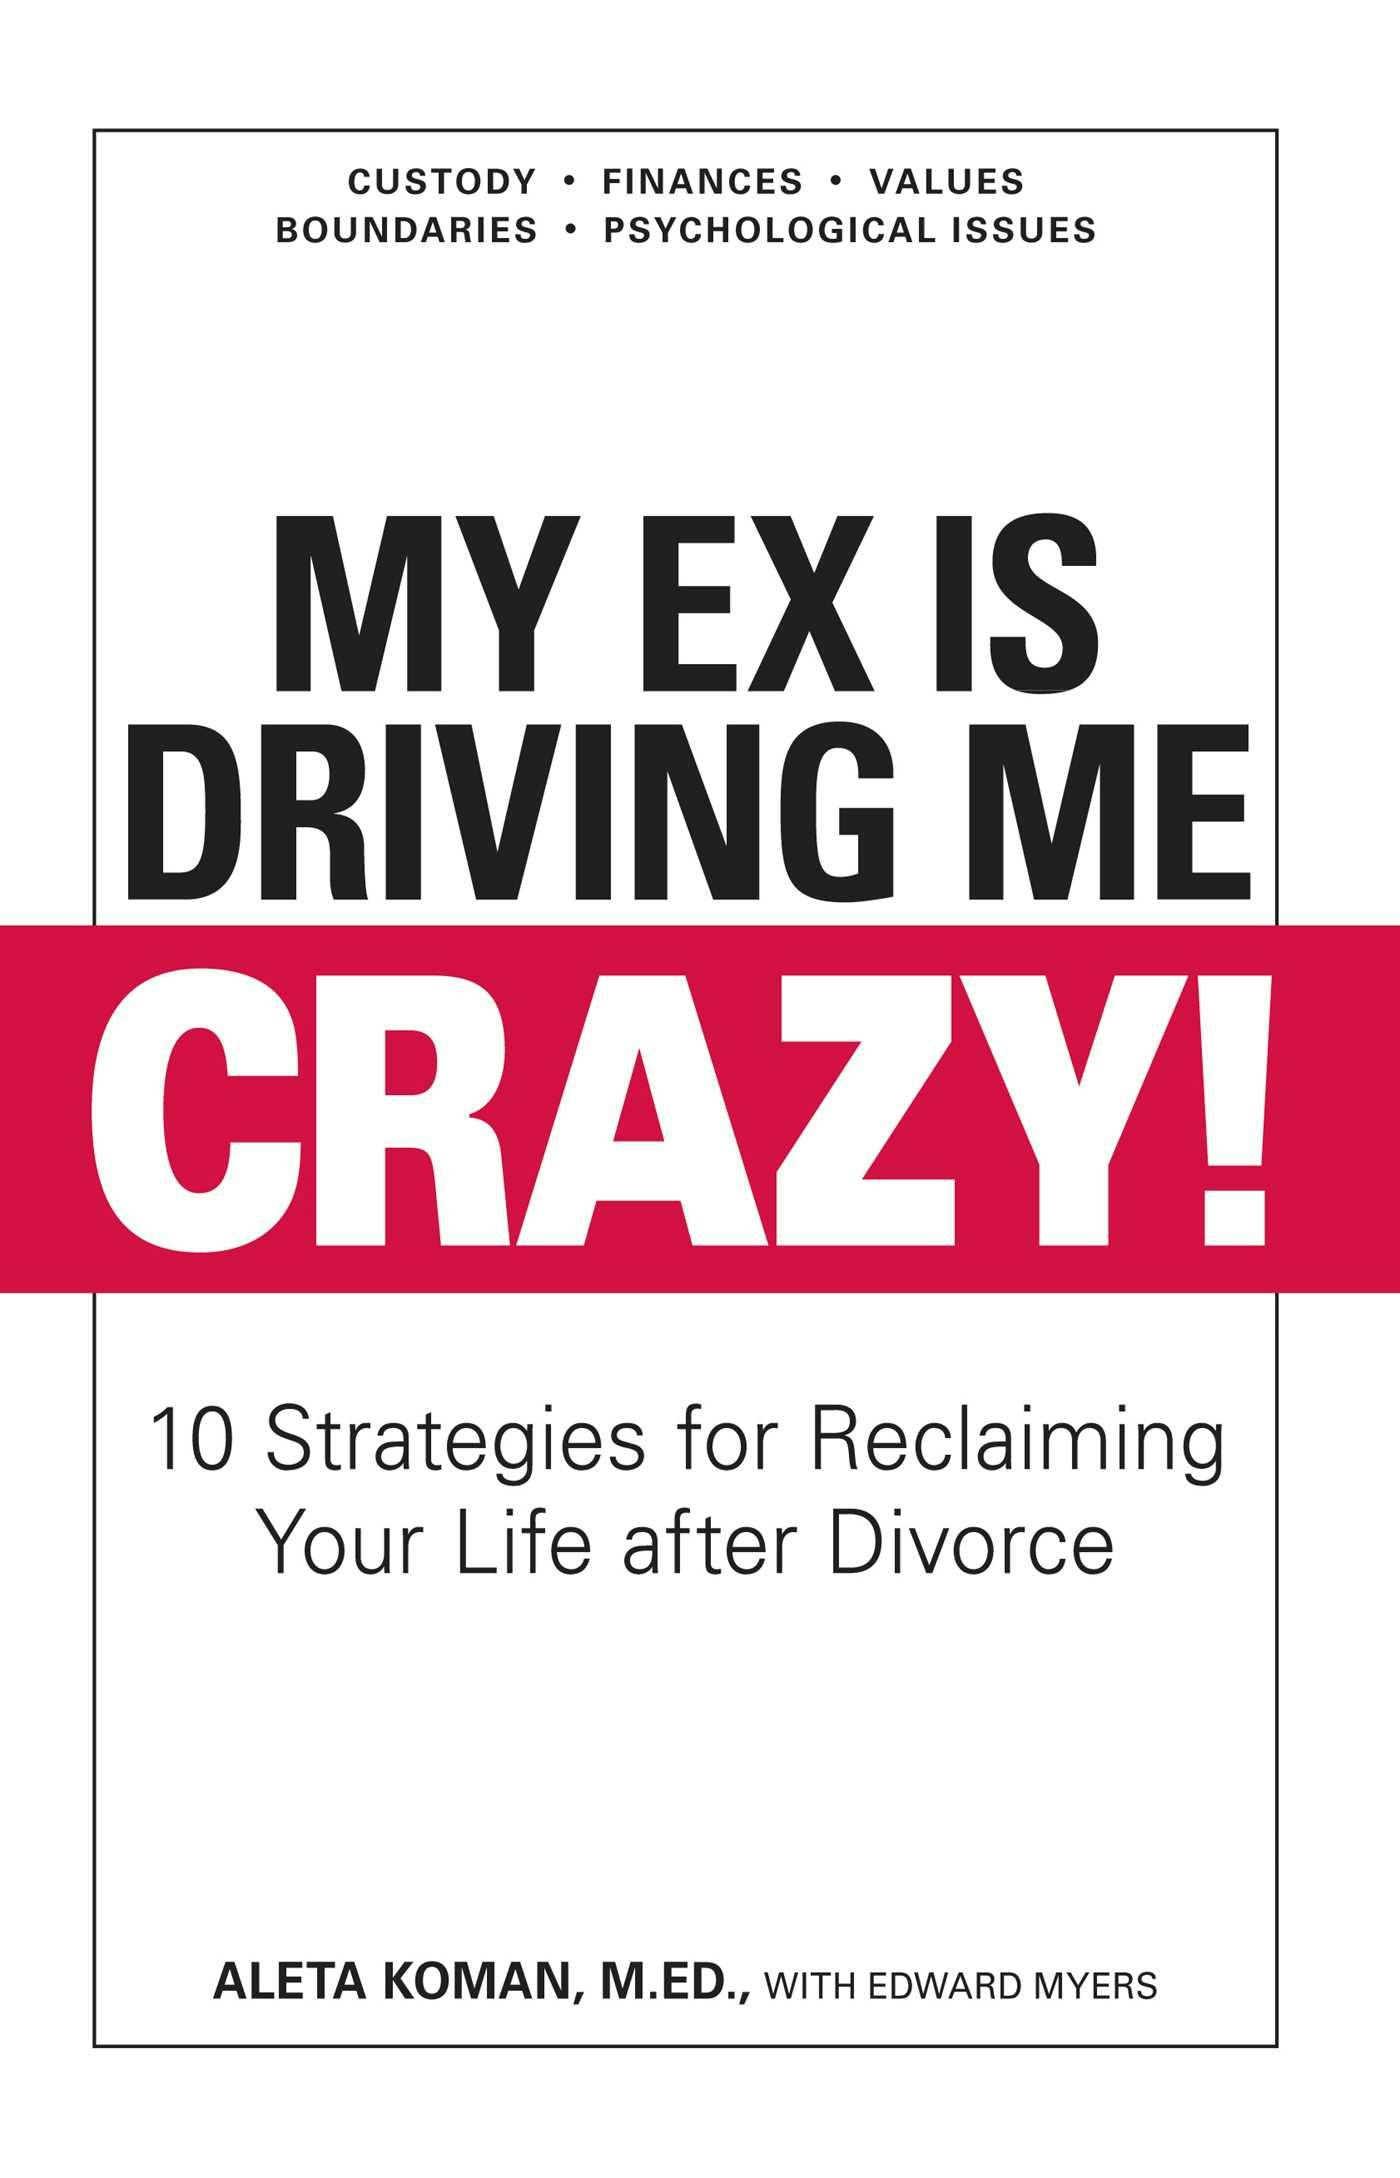 My Ex Is Driving Me Crazy: 10 Strategies for Reclaiming Your Life after Divorce - Edward Myers, Aleta Koman